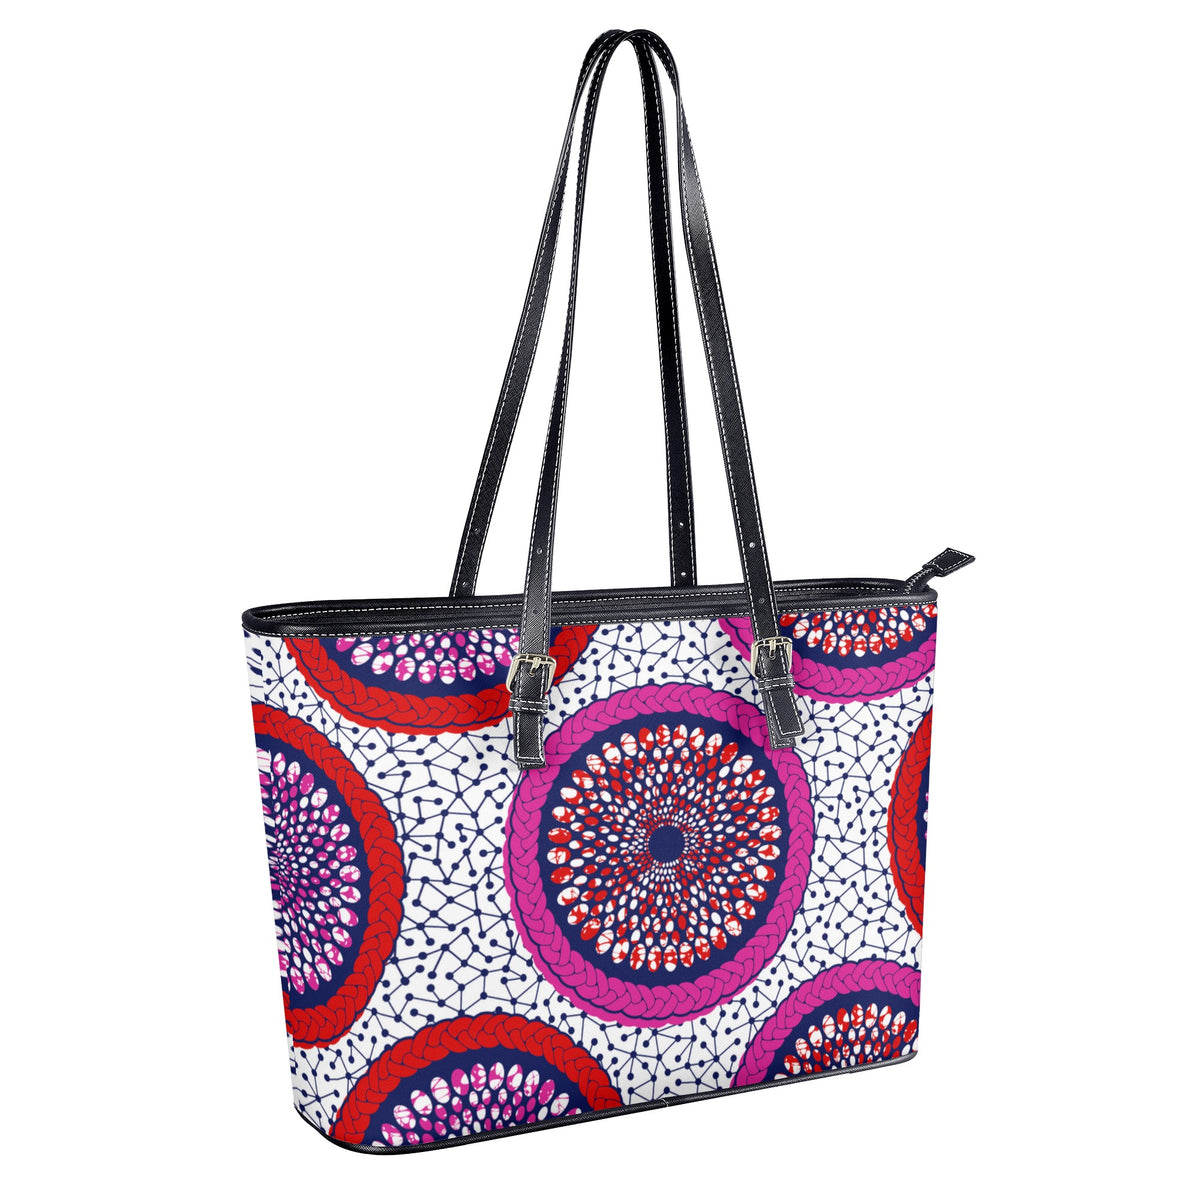 Leather Tote Bags in Ankara Prints Popcustoms